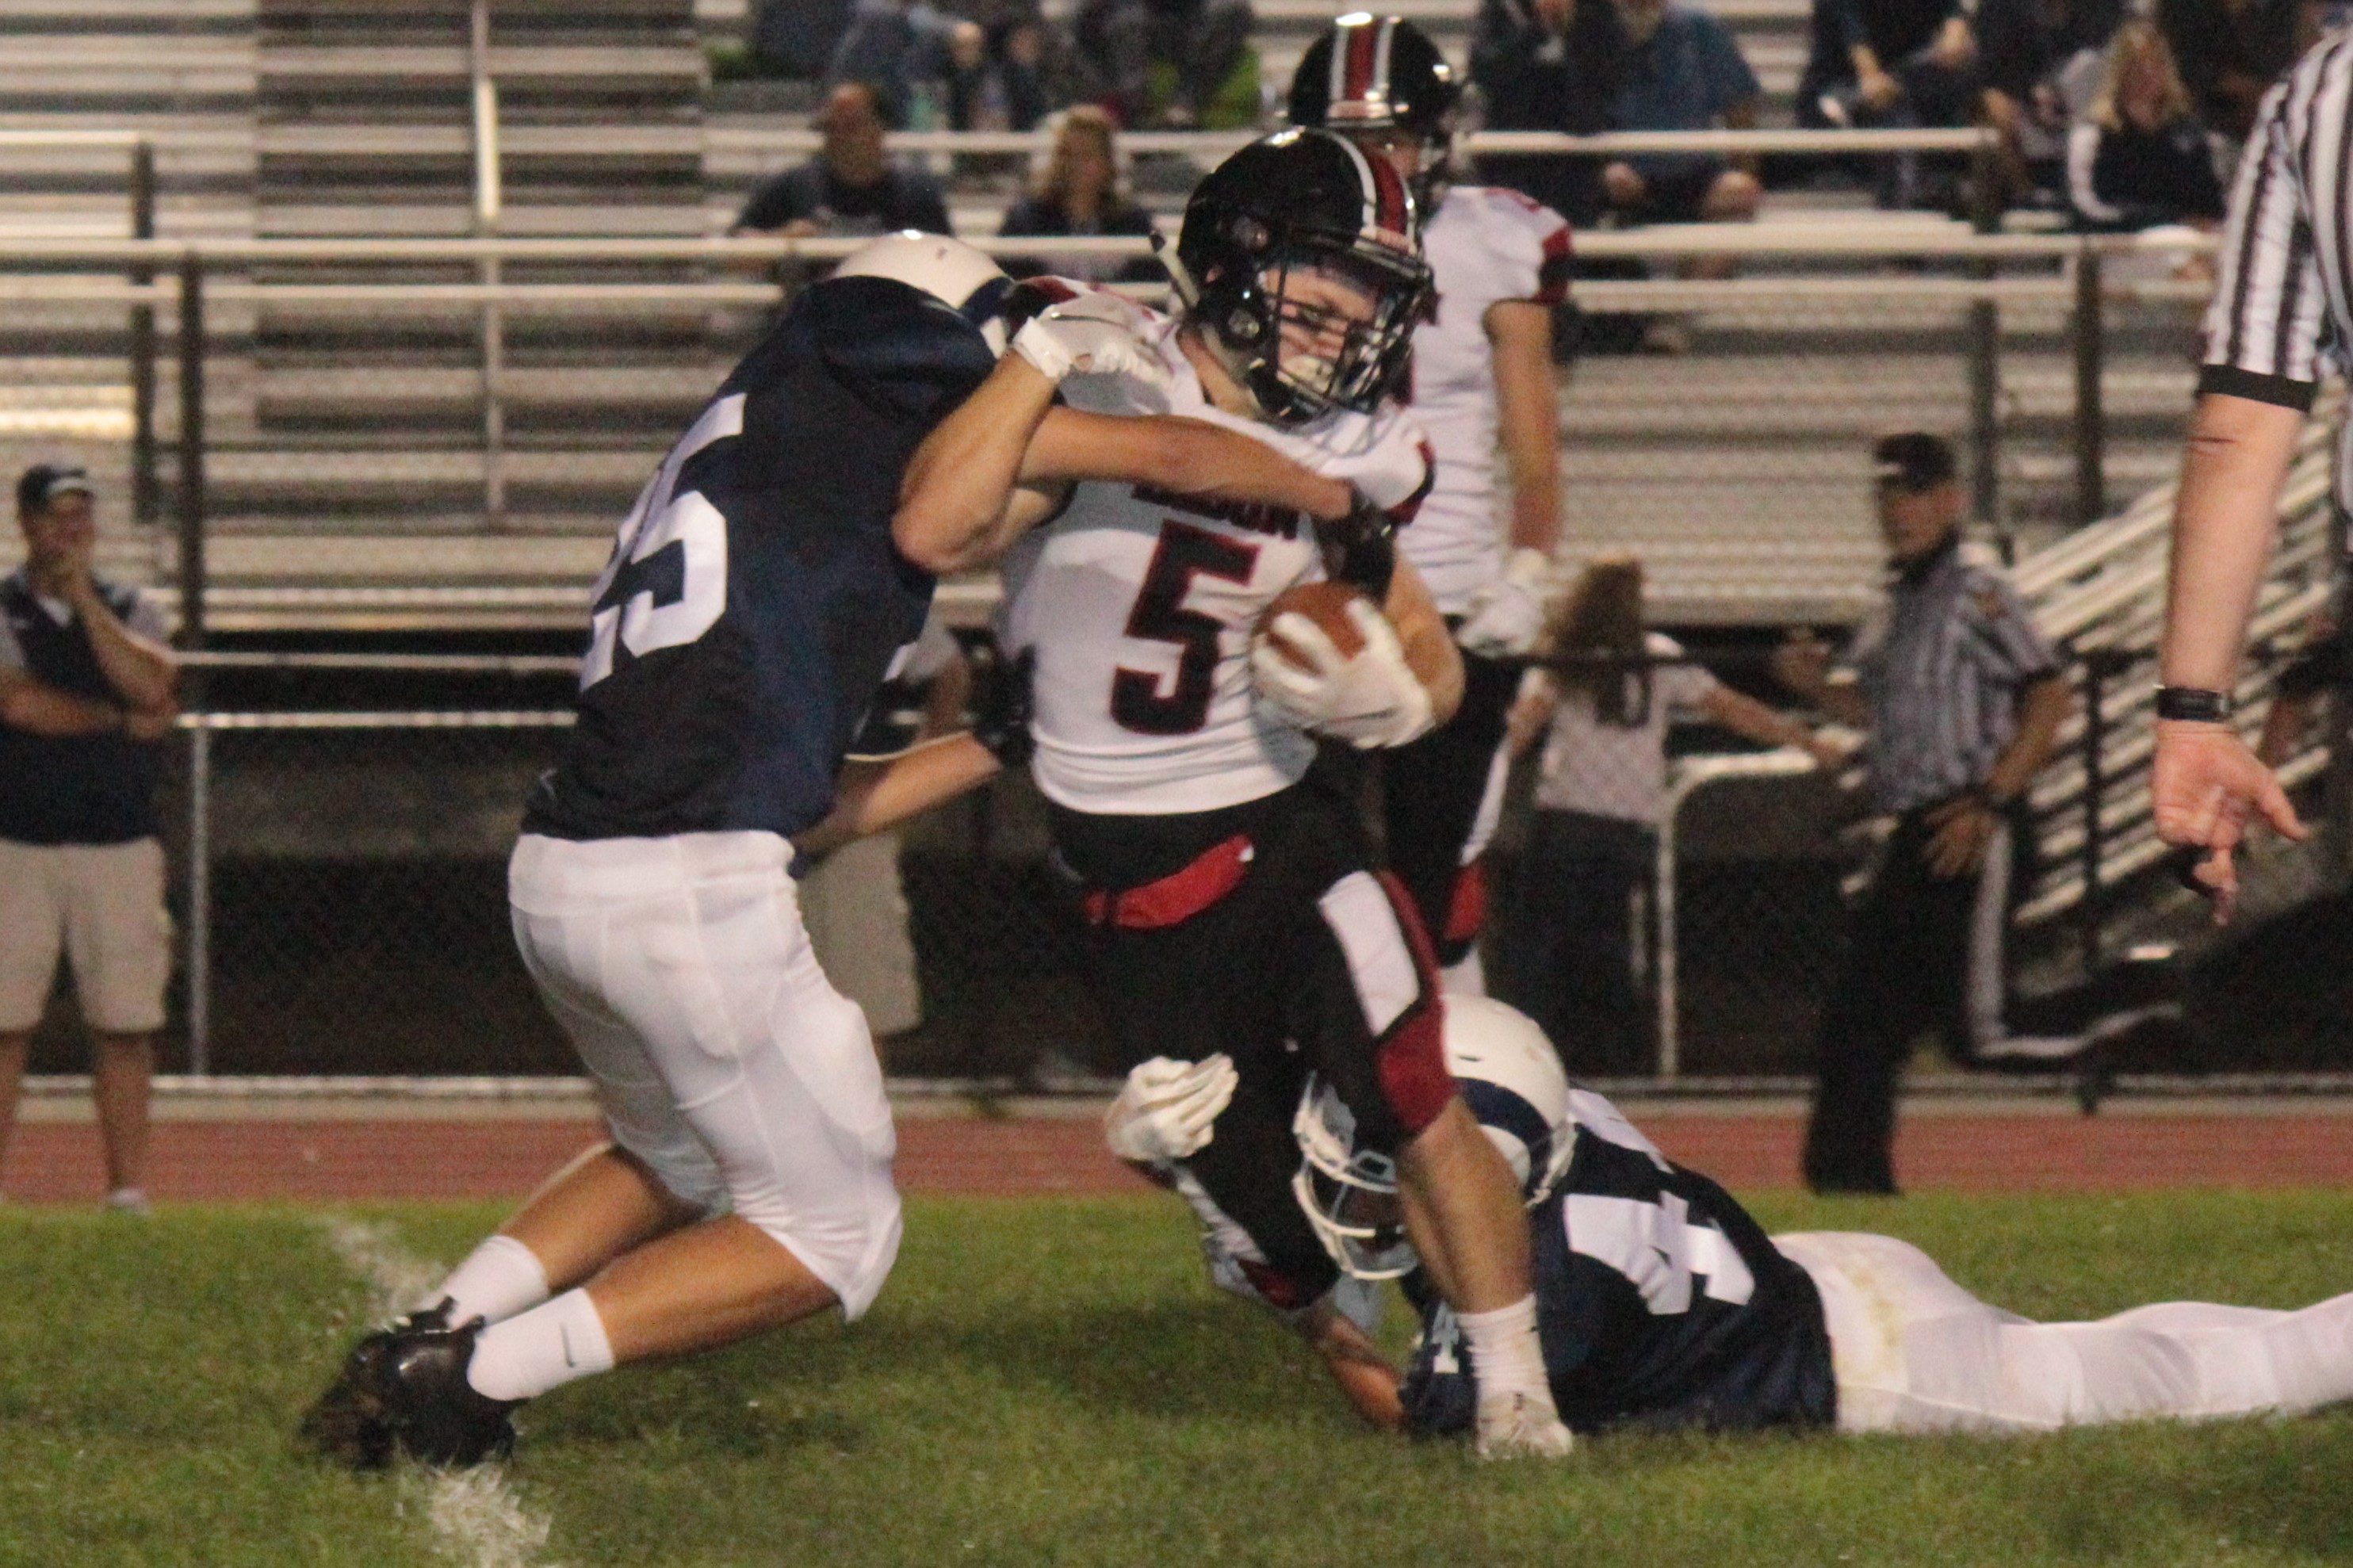 Although struggling for yards here, Caleb Freeland (5) had a career night, scoring five touchdowns.